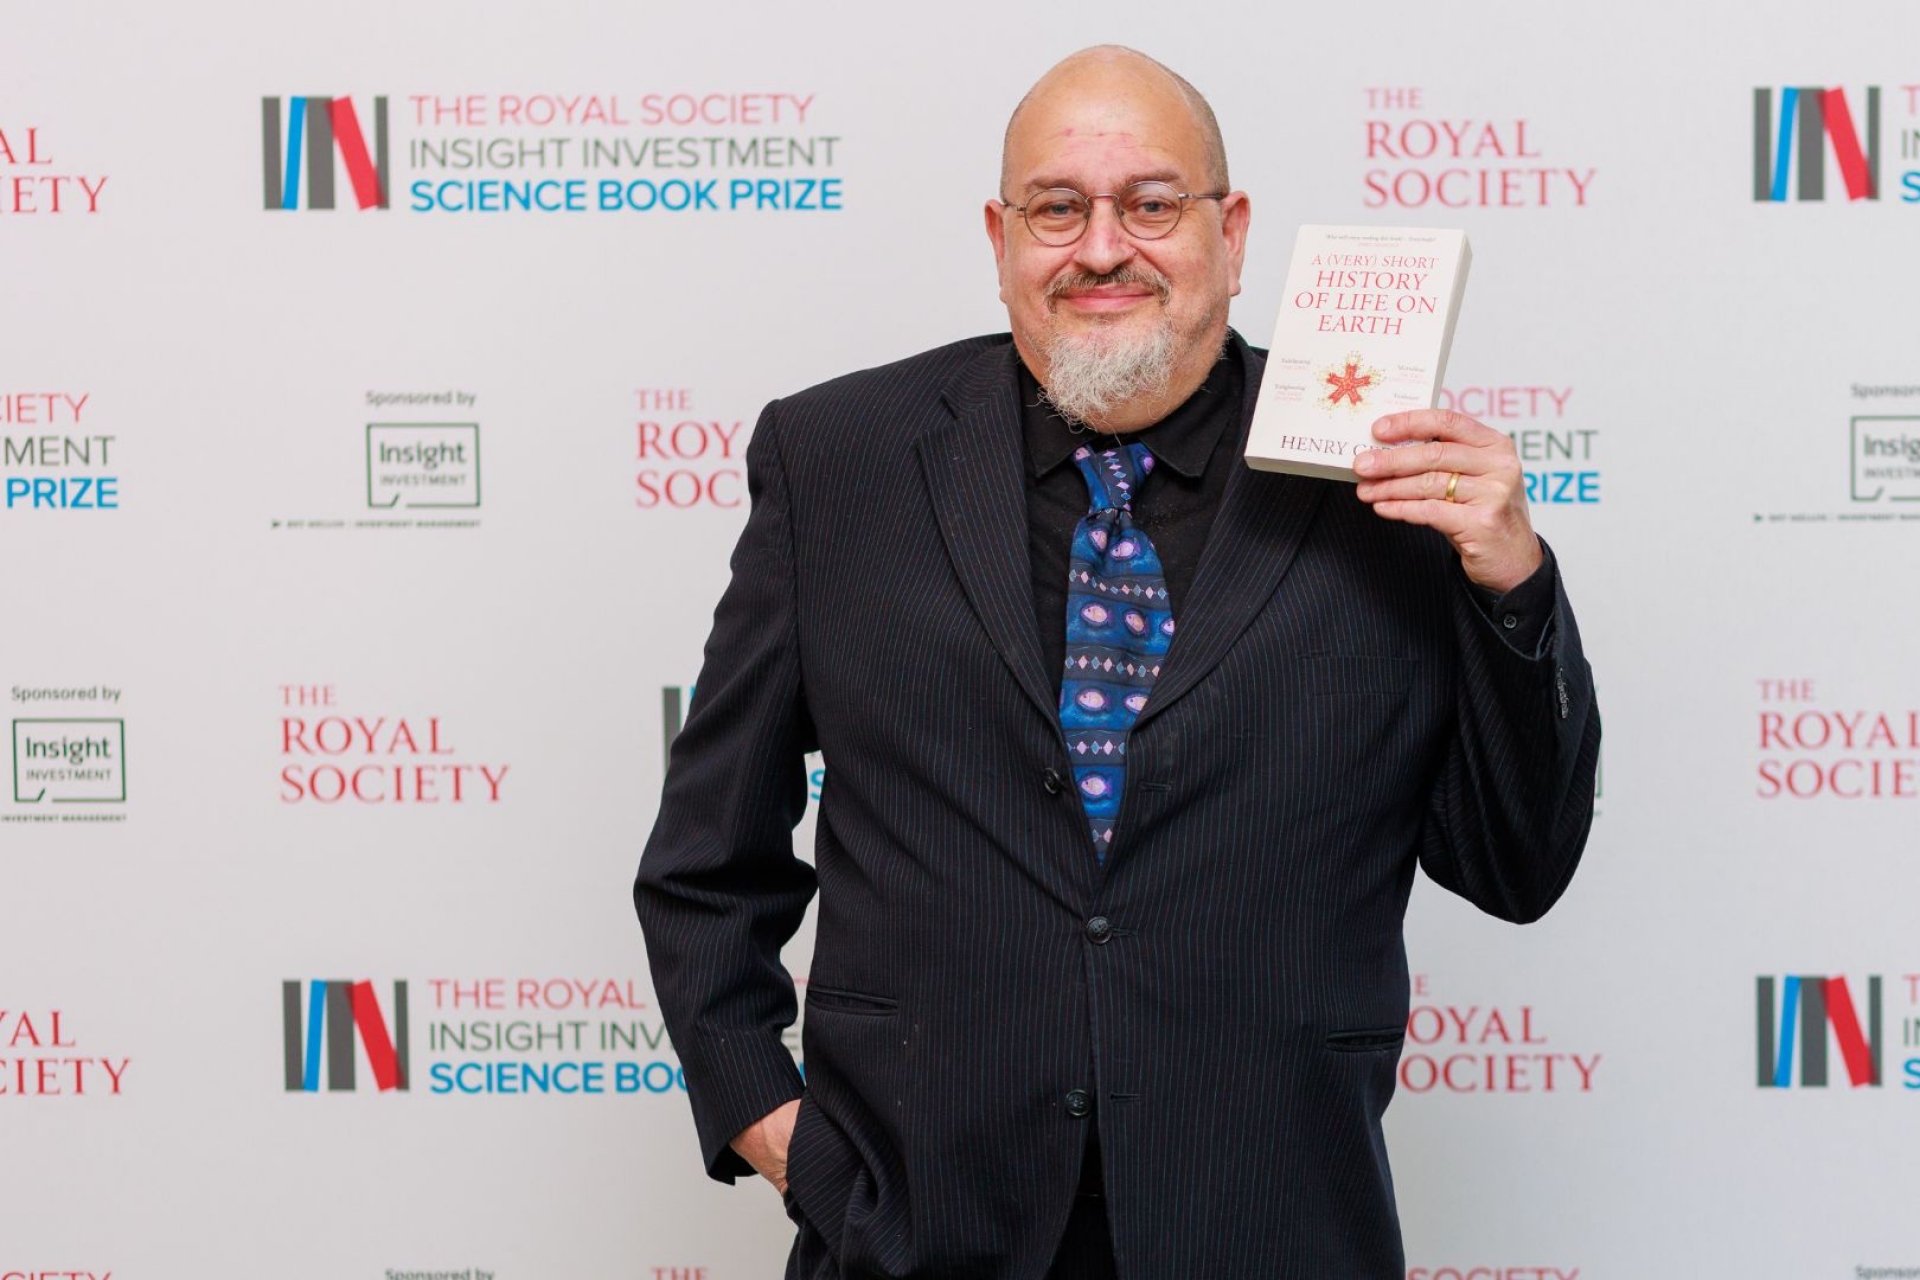 Gee wins £25,000 Royal Society Science Book Prize for enlightening tale of survival